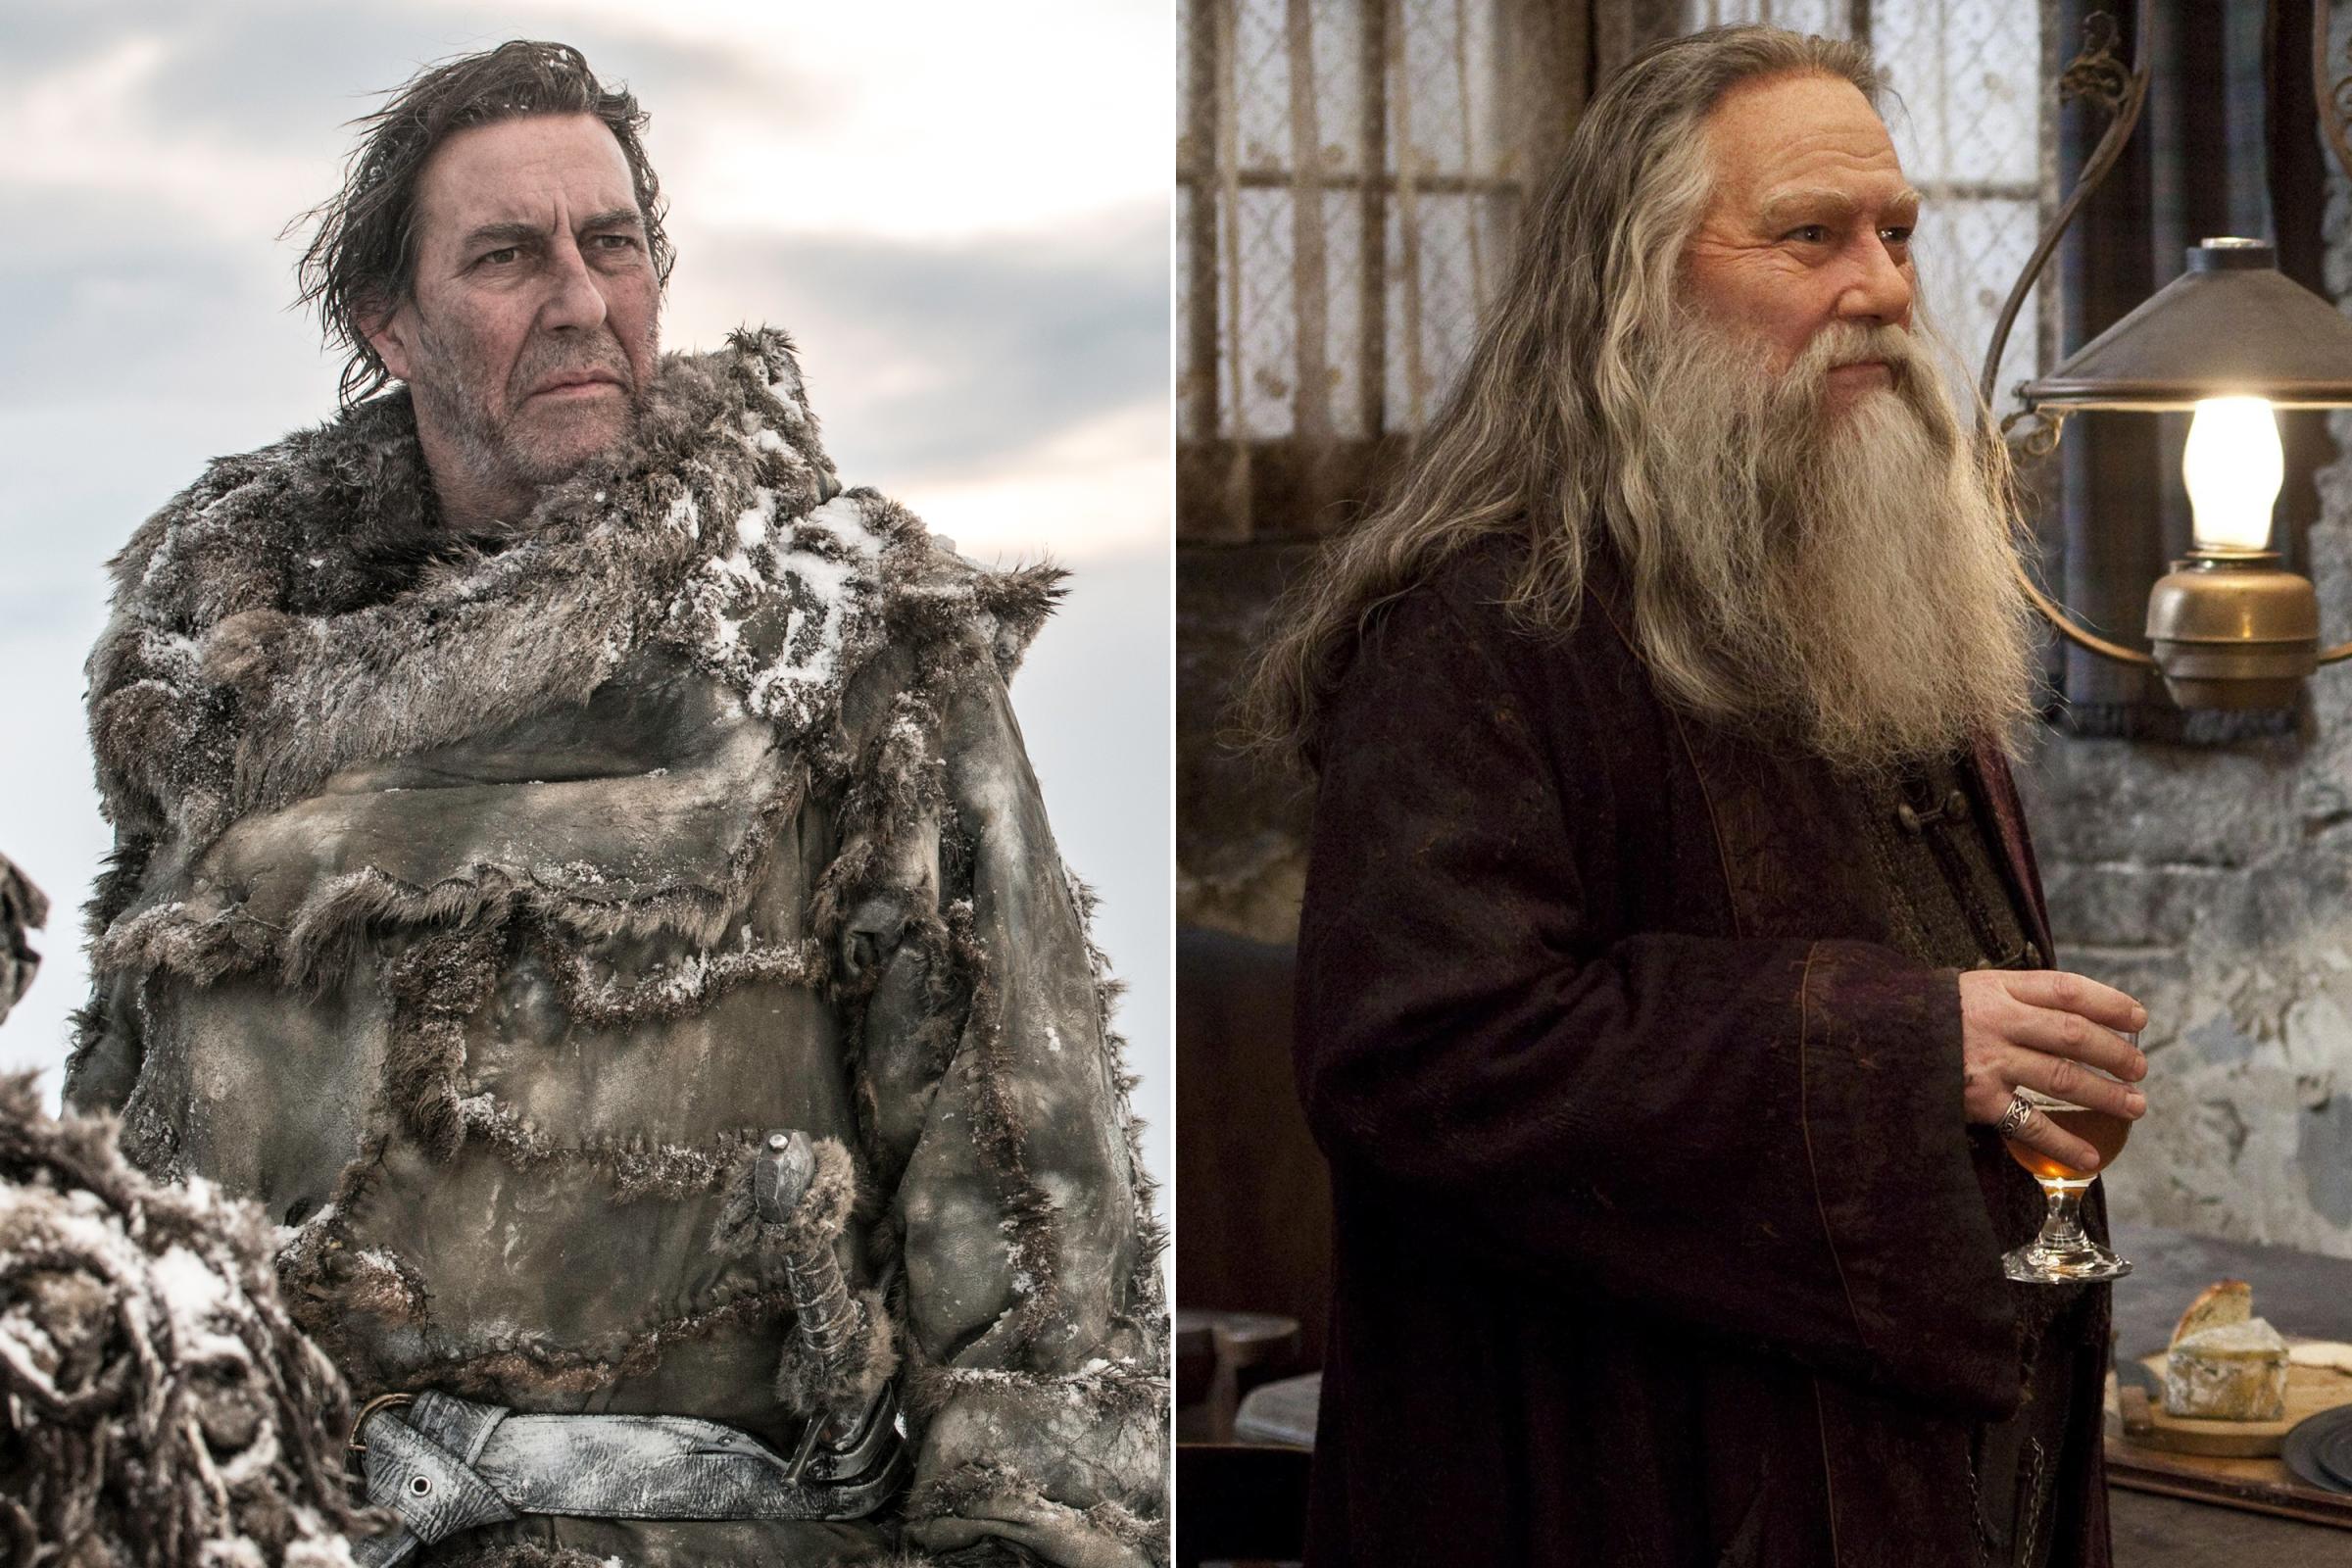 Ciarán Hinds as Mance Rayder and Aberforth Dumbledore